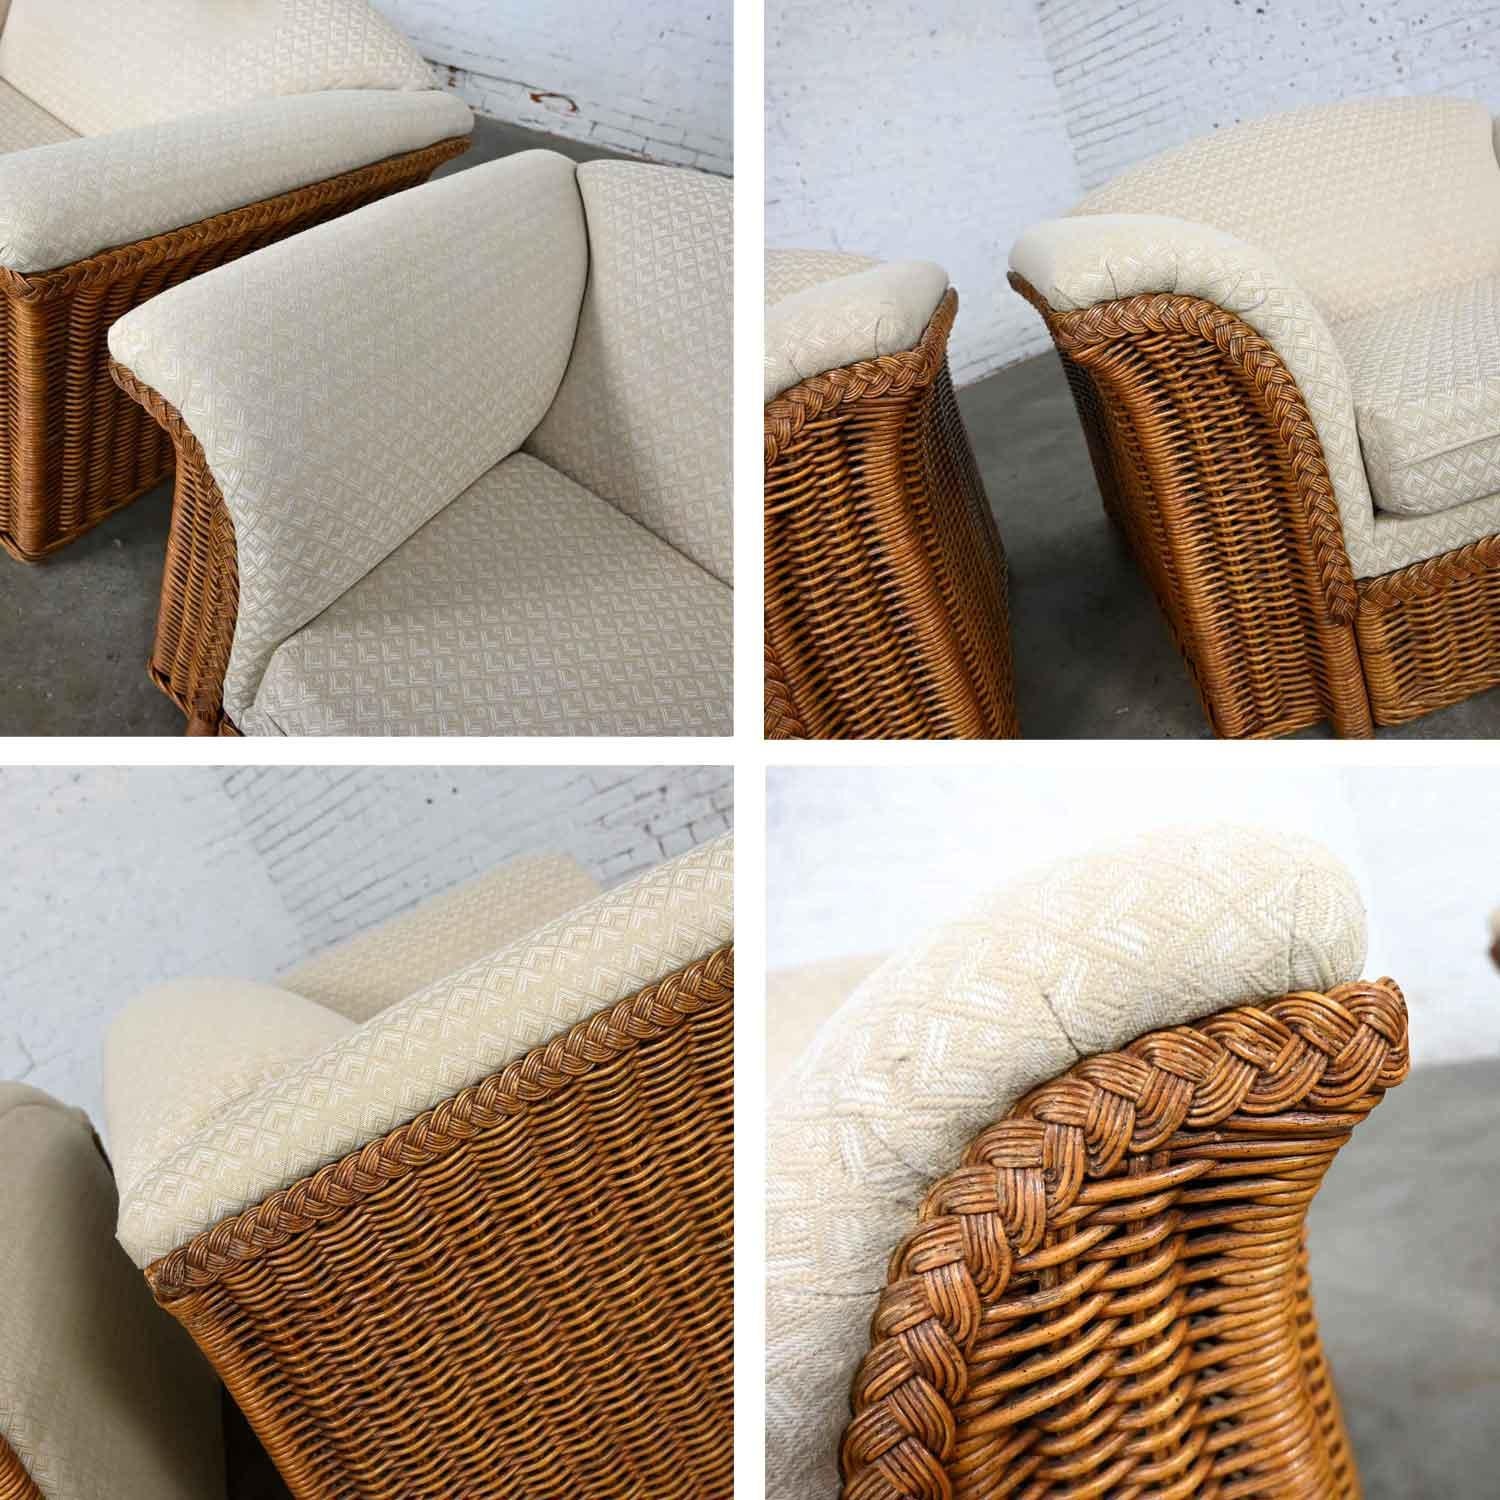 Rattan Wicker Pair of Oversized Lounge Chairs Manner of Michael Taylor For Sale 10